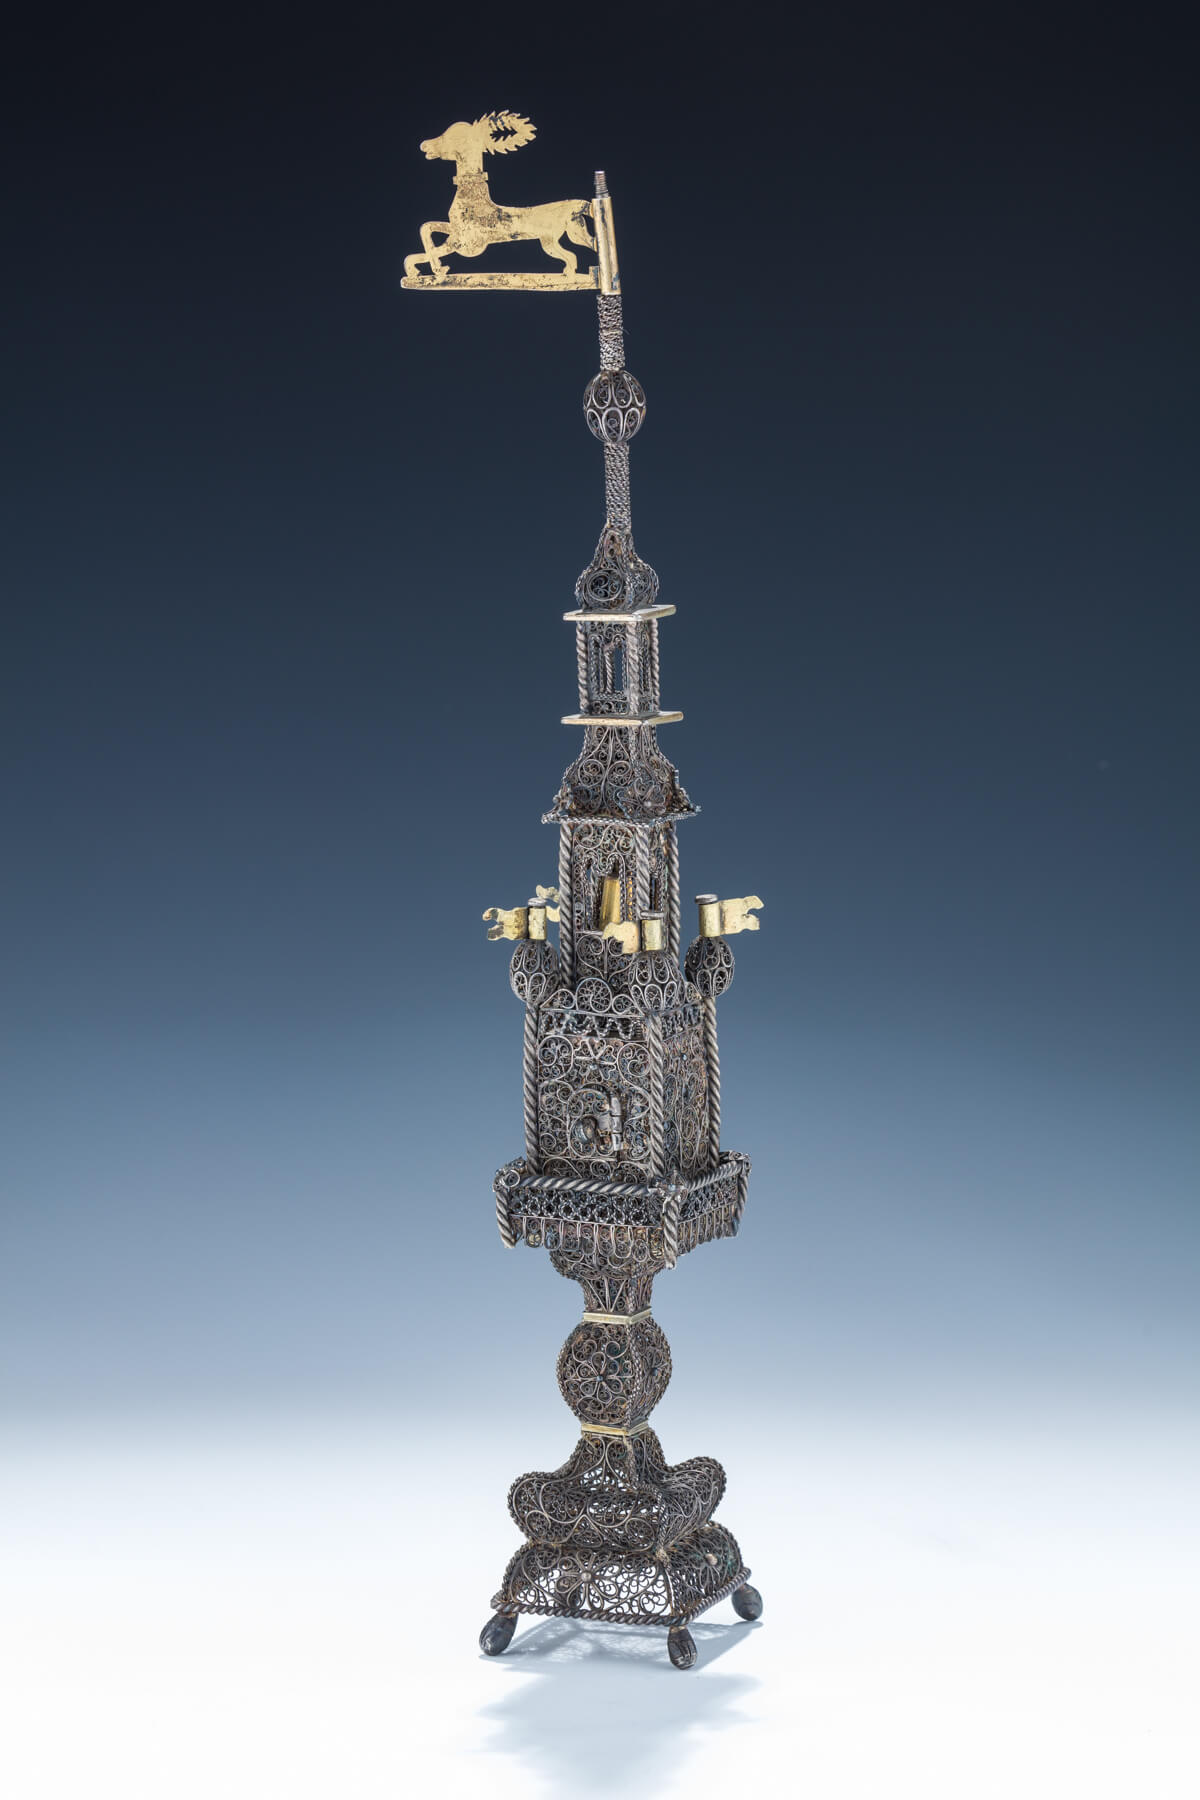 125. A Rare And Important Filigree Monumental Spice Tower